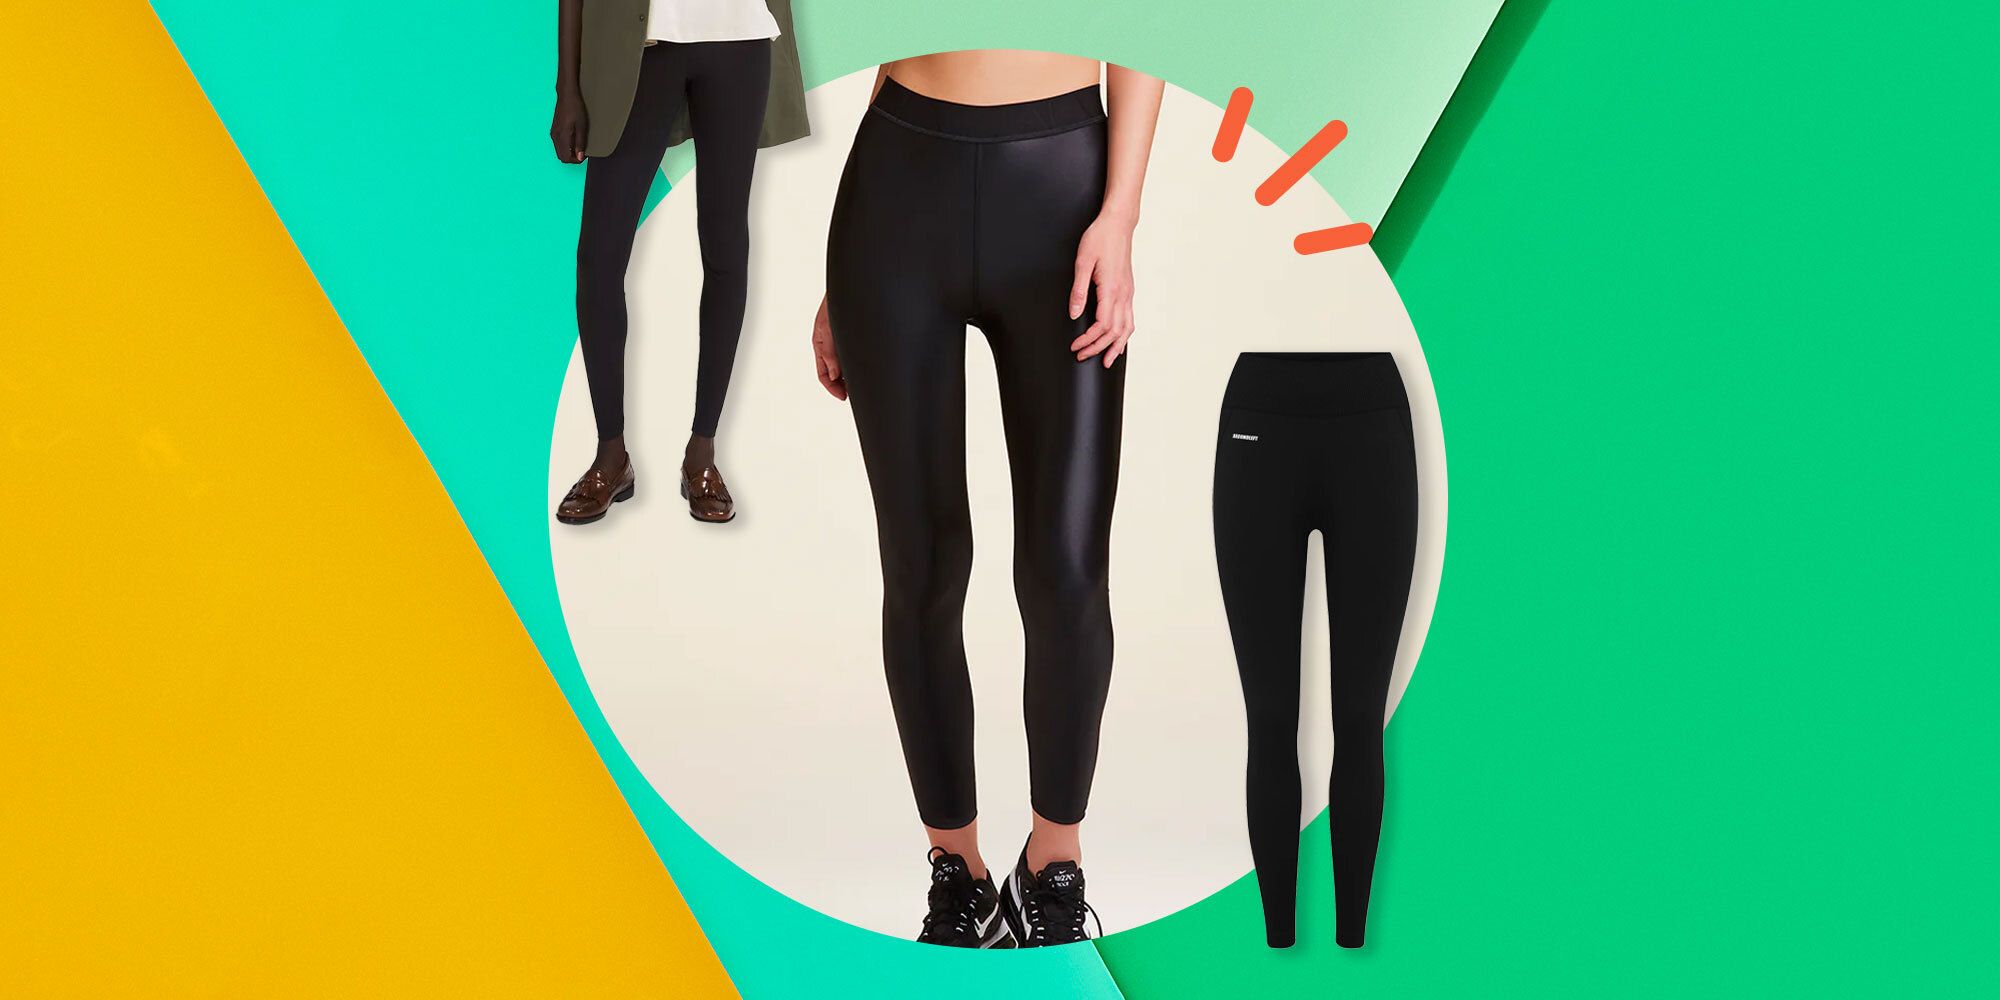 Different ways to wear Black Pants for women